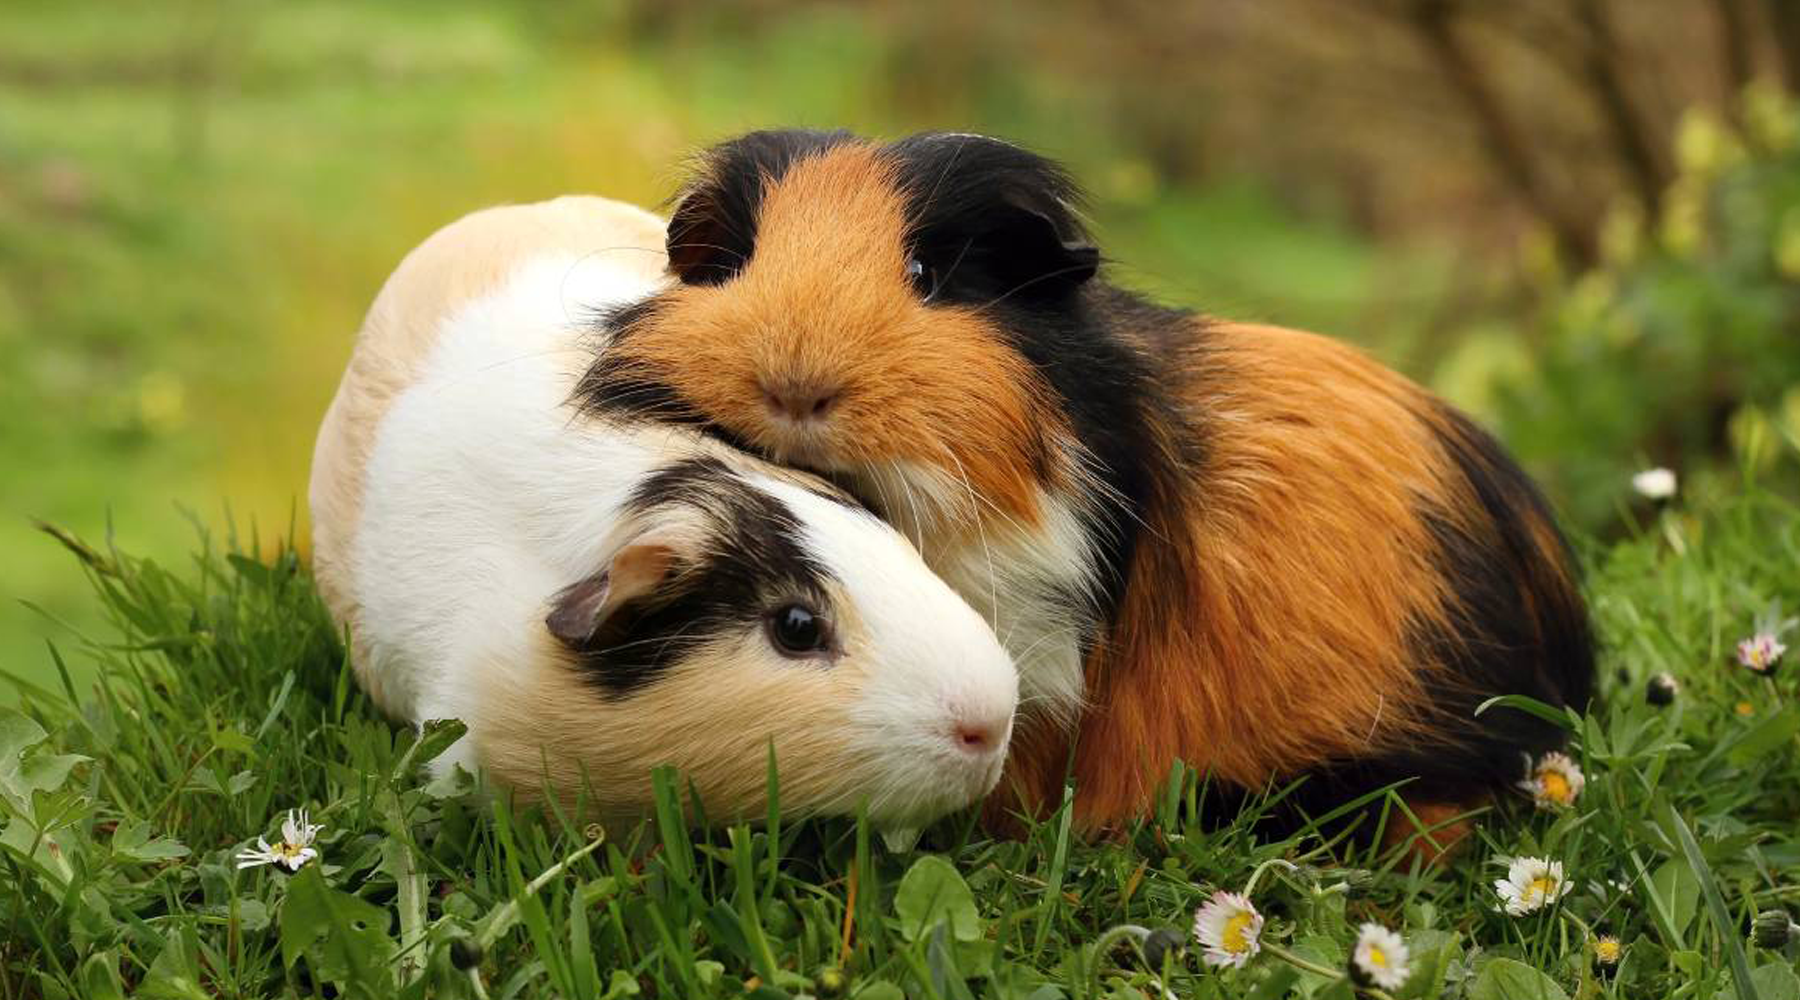 What should I feed my Guinea Pig?